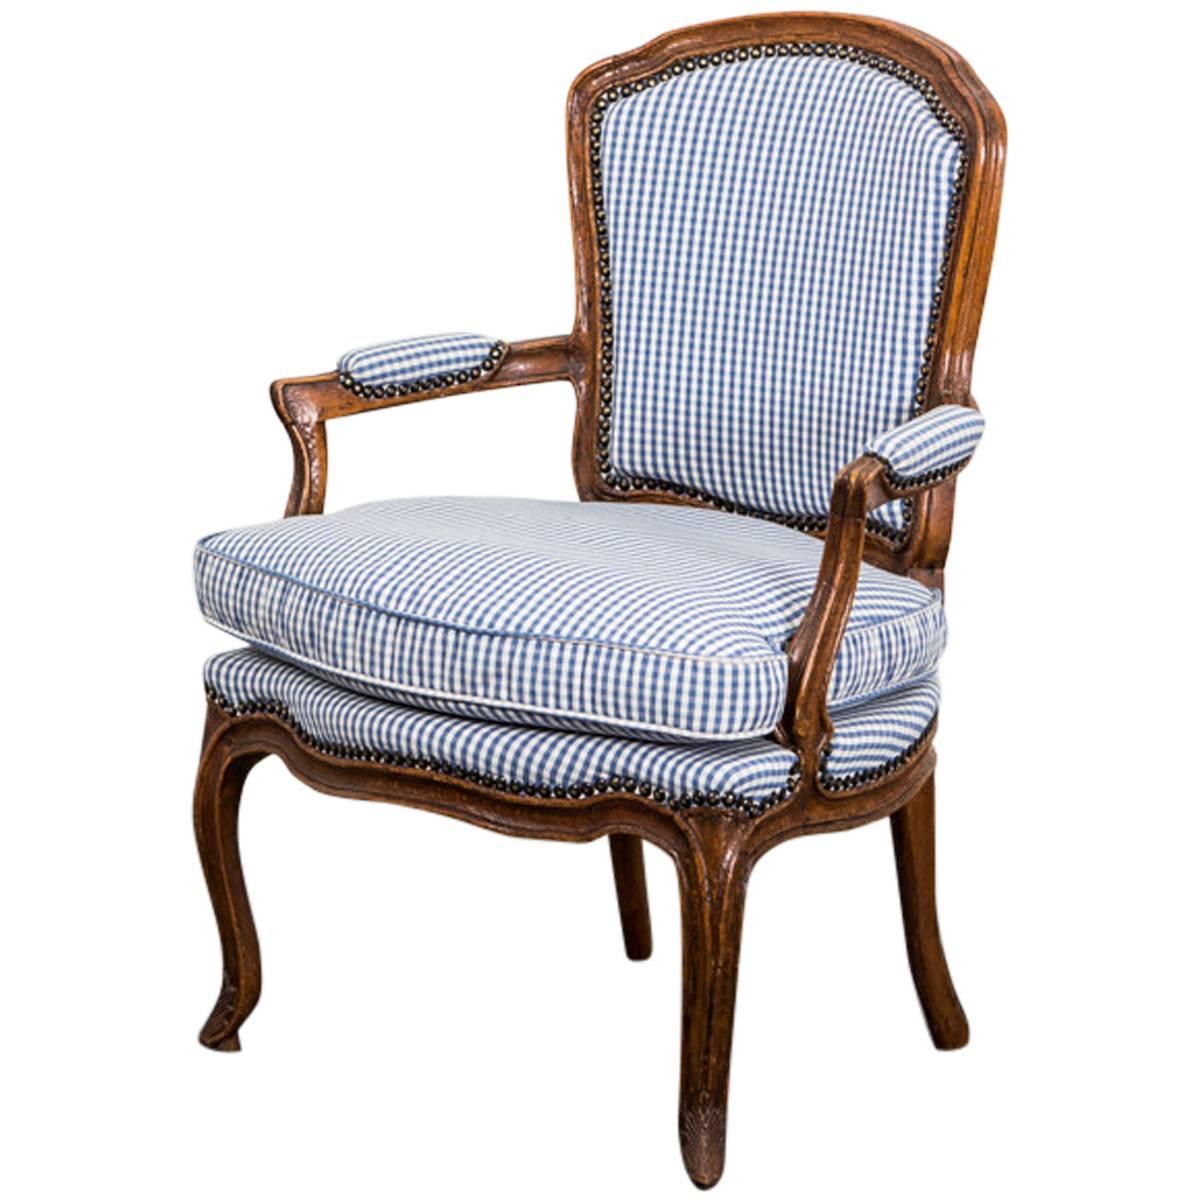 Armchair Rococo Swedish 18th Century Blue and White Fabric Sweden